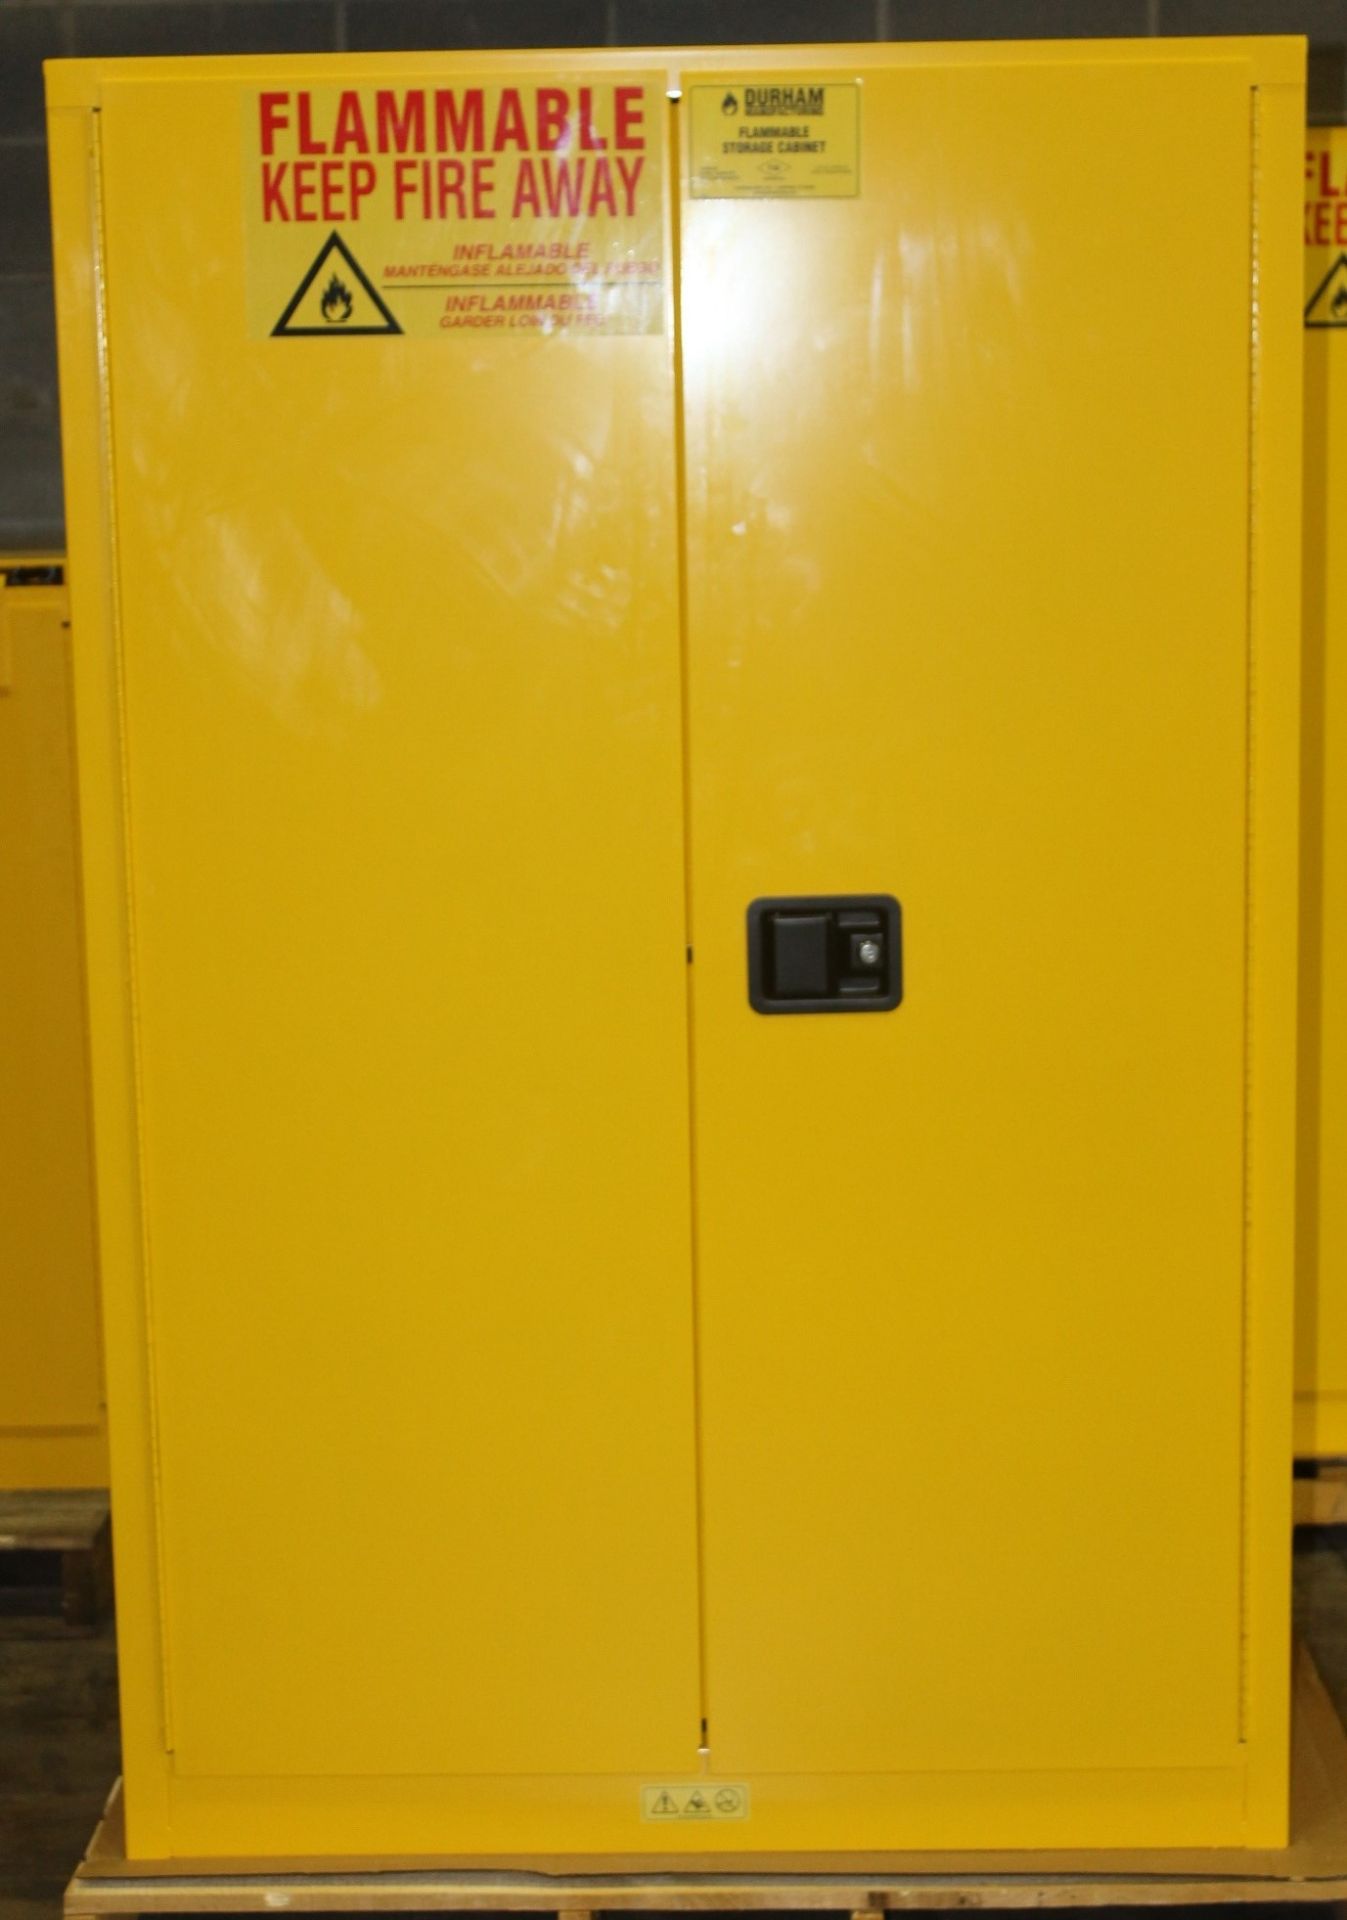 45 GALLONS FLAMMABLE SAFETY STORAGE CABINET, NEW - Image 2 of 3